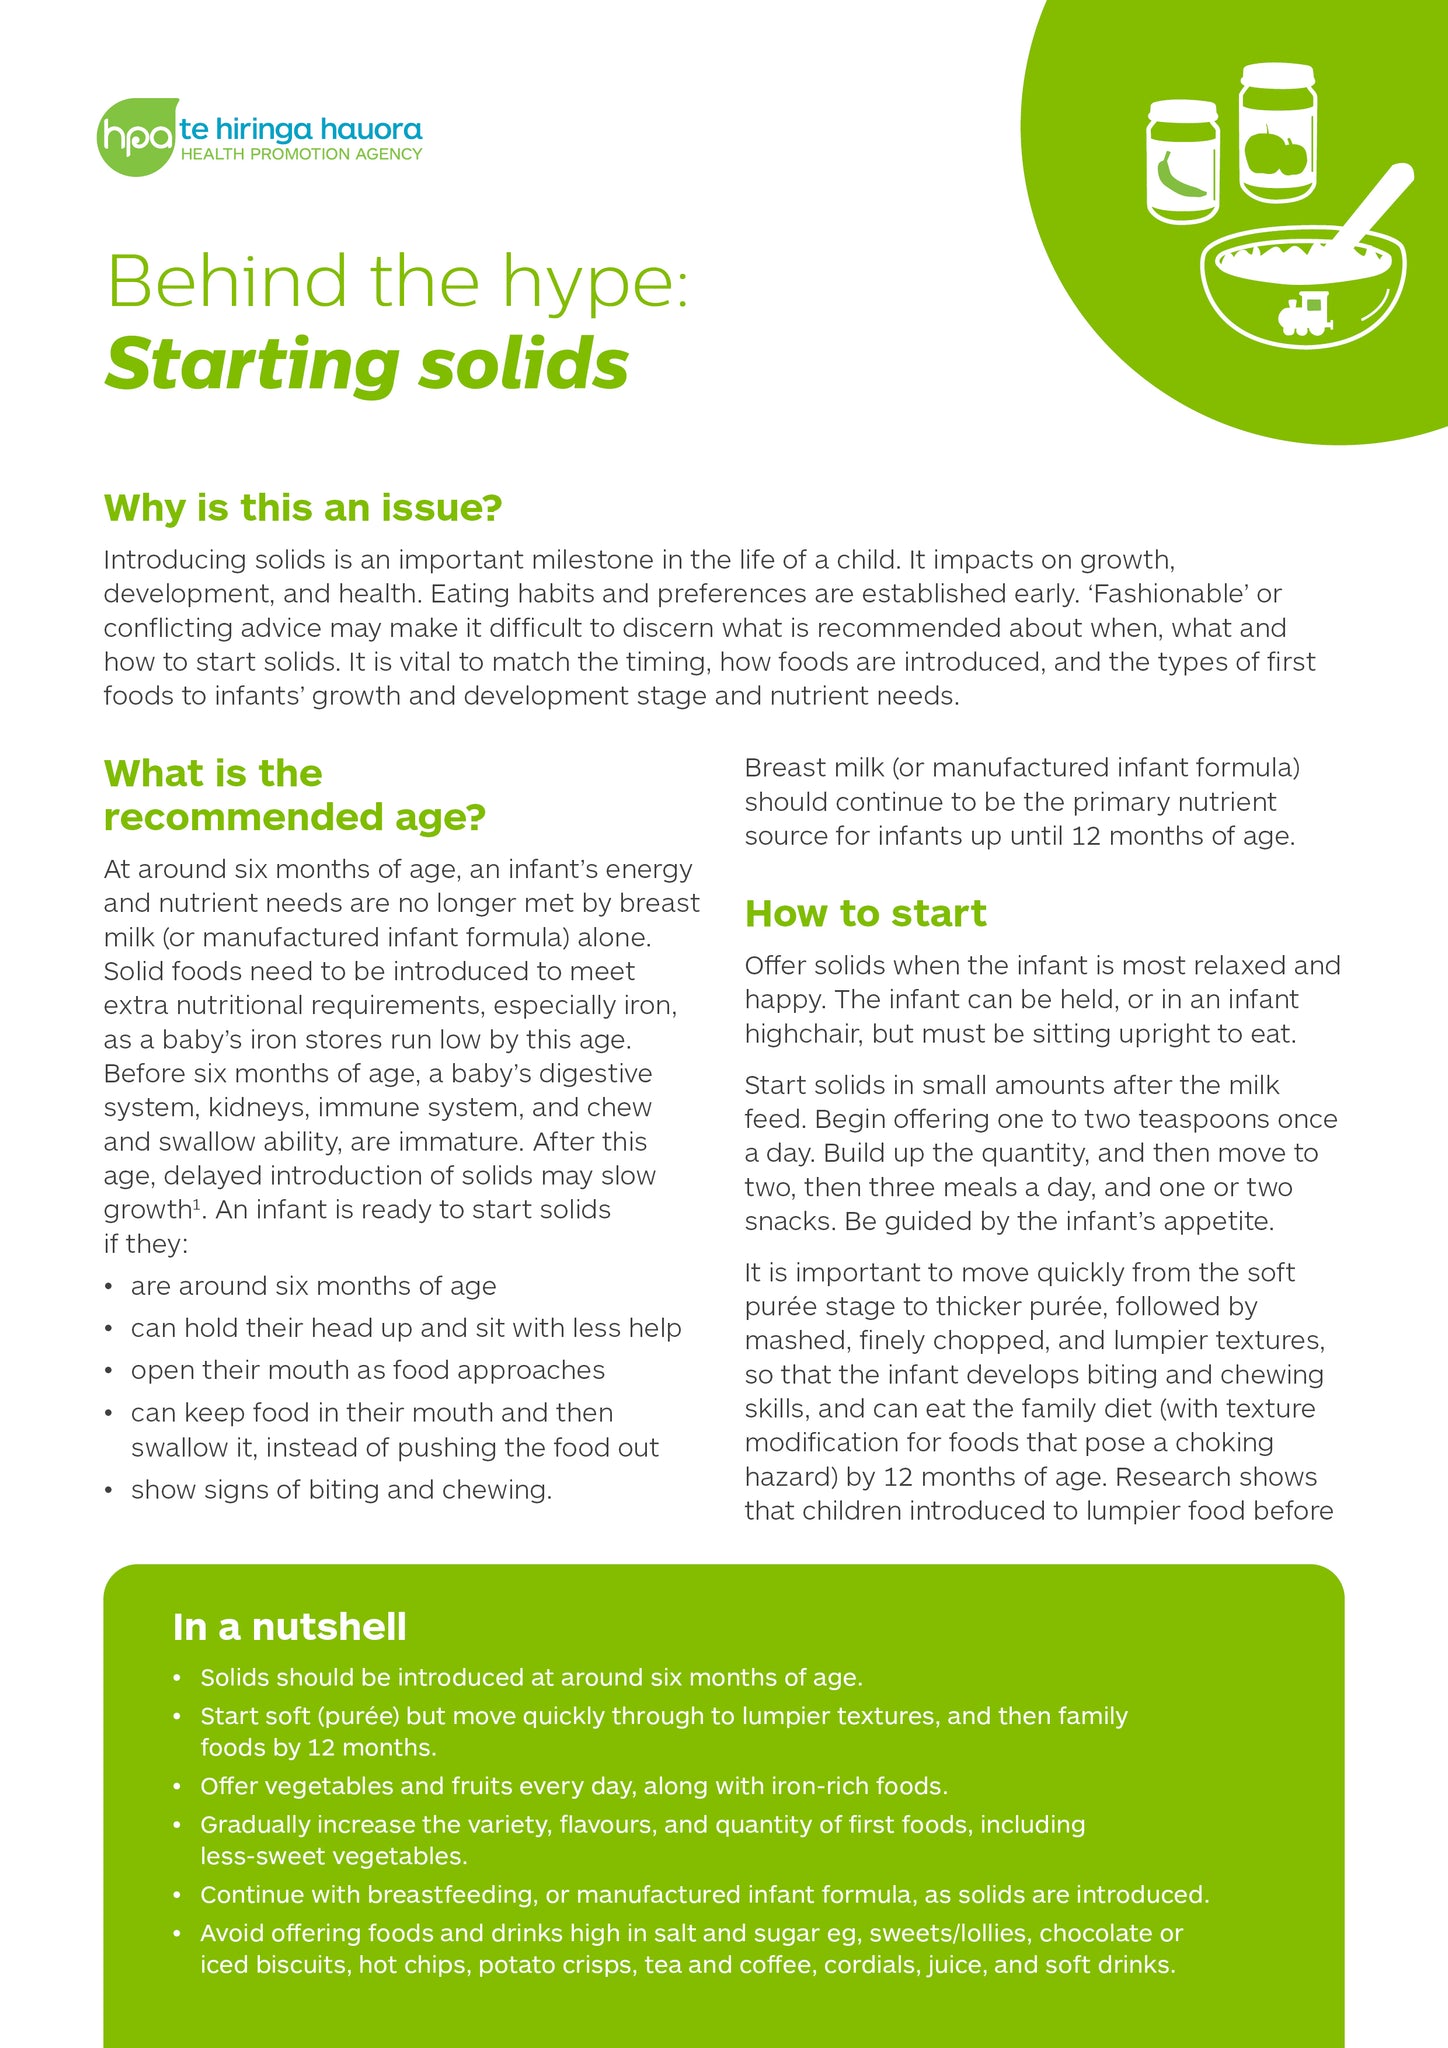 Behind the hype: Starting solids (PDF only)